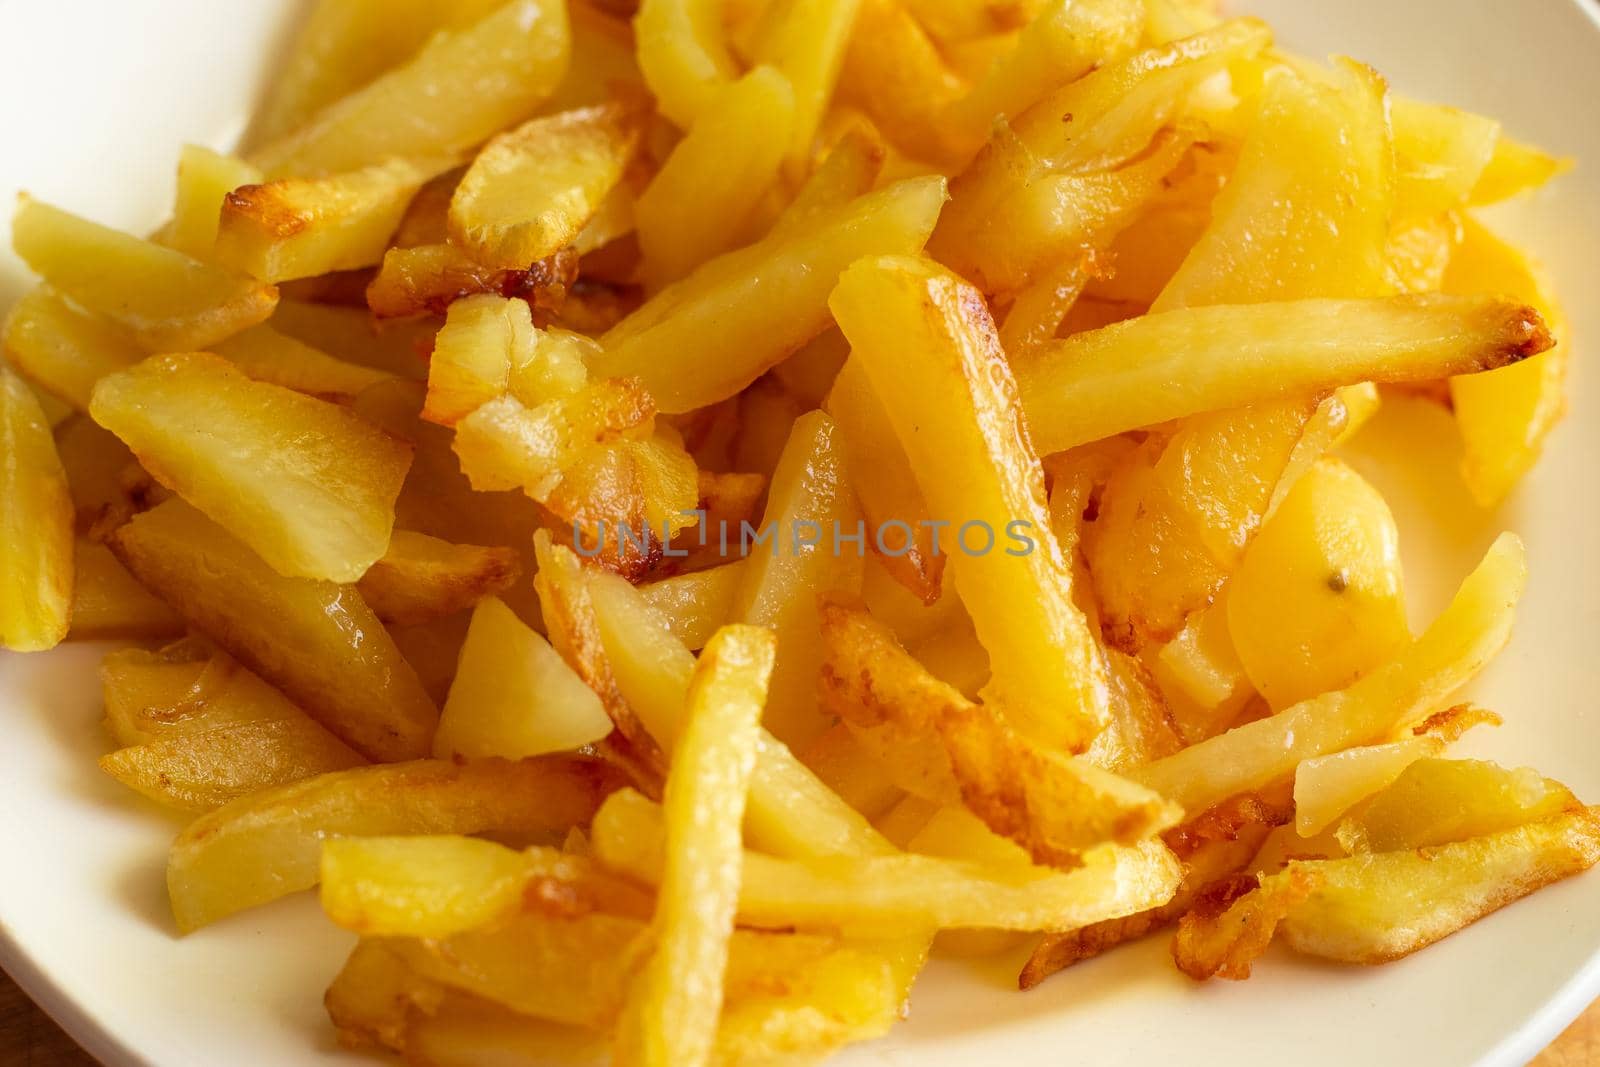 a plate of mouth-watering fresh fried potatoes with a golden crust.